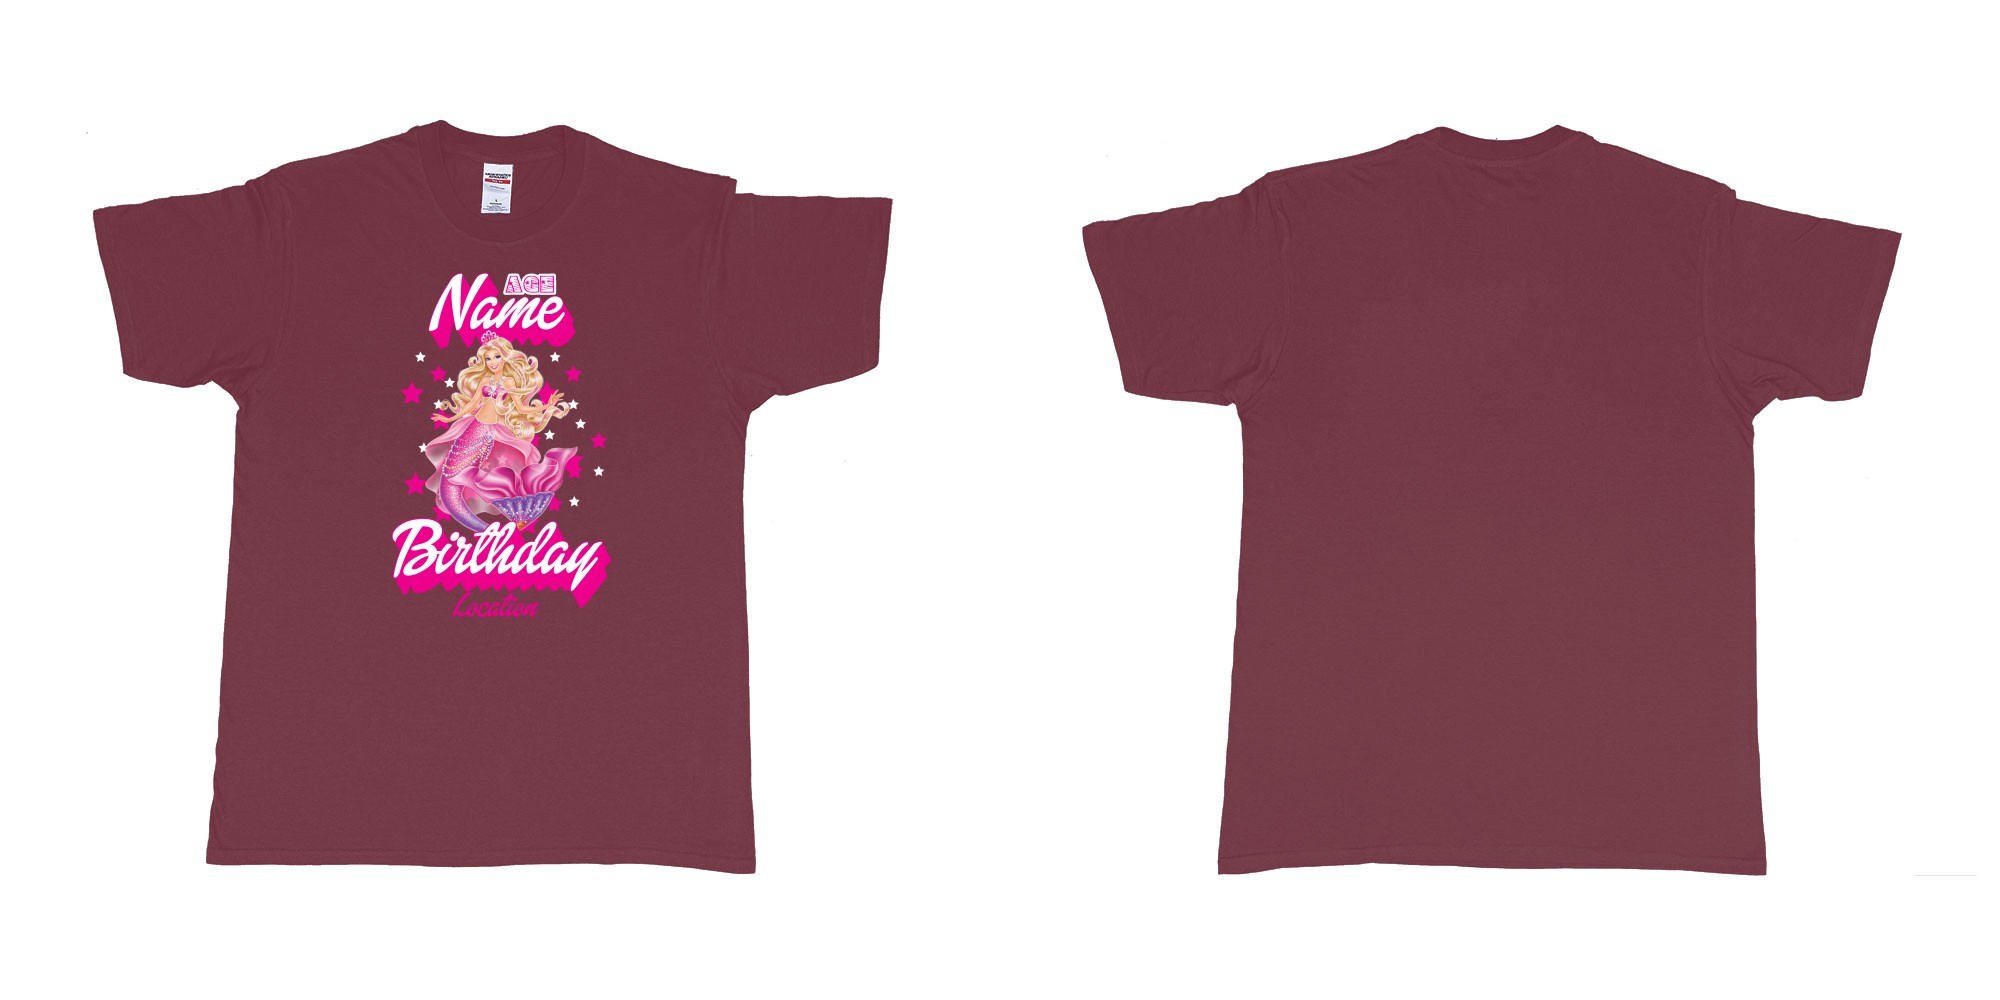 Custom tshirt design barbie mermaid custom name birthday in fabric color marron choice your own text made in Bali by The Pirate Way